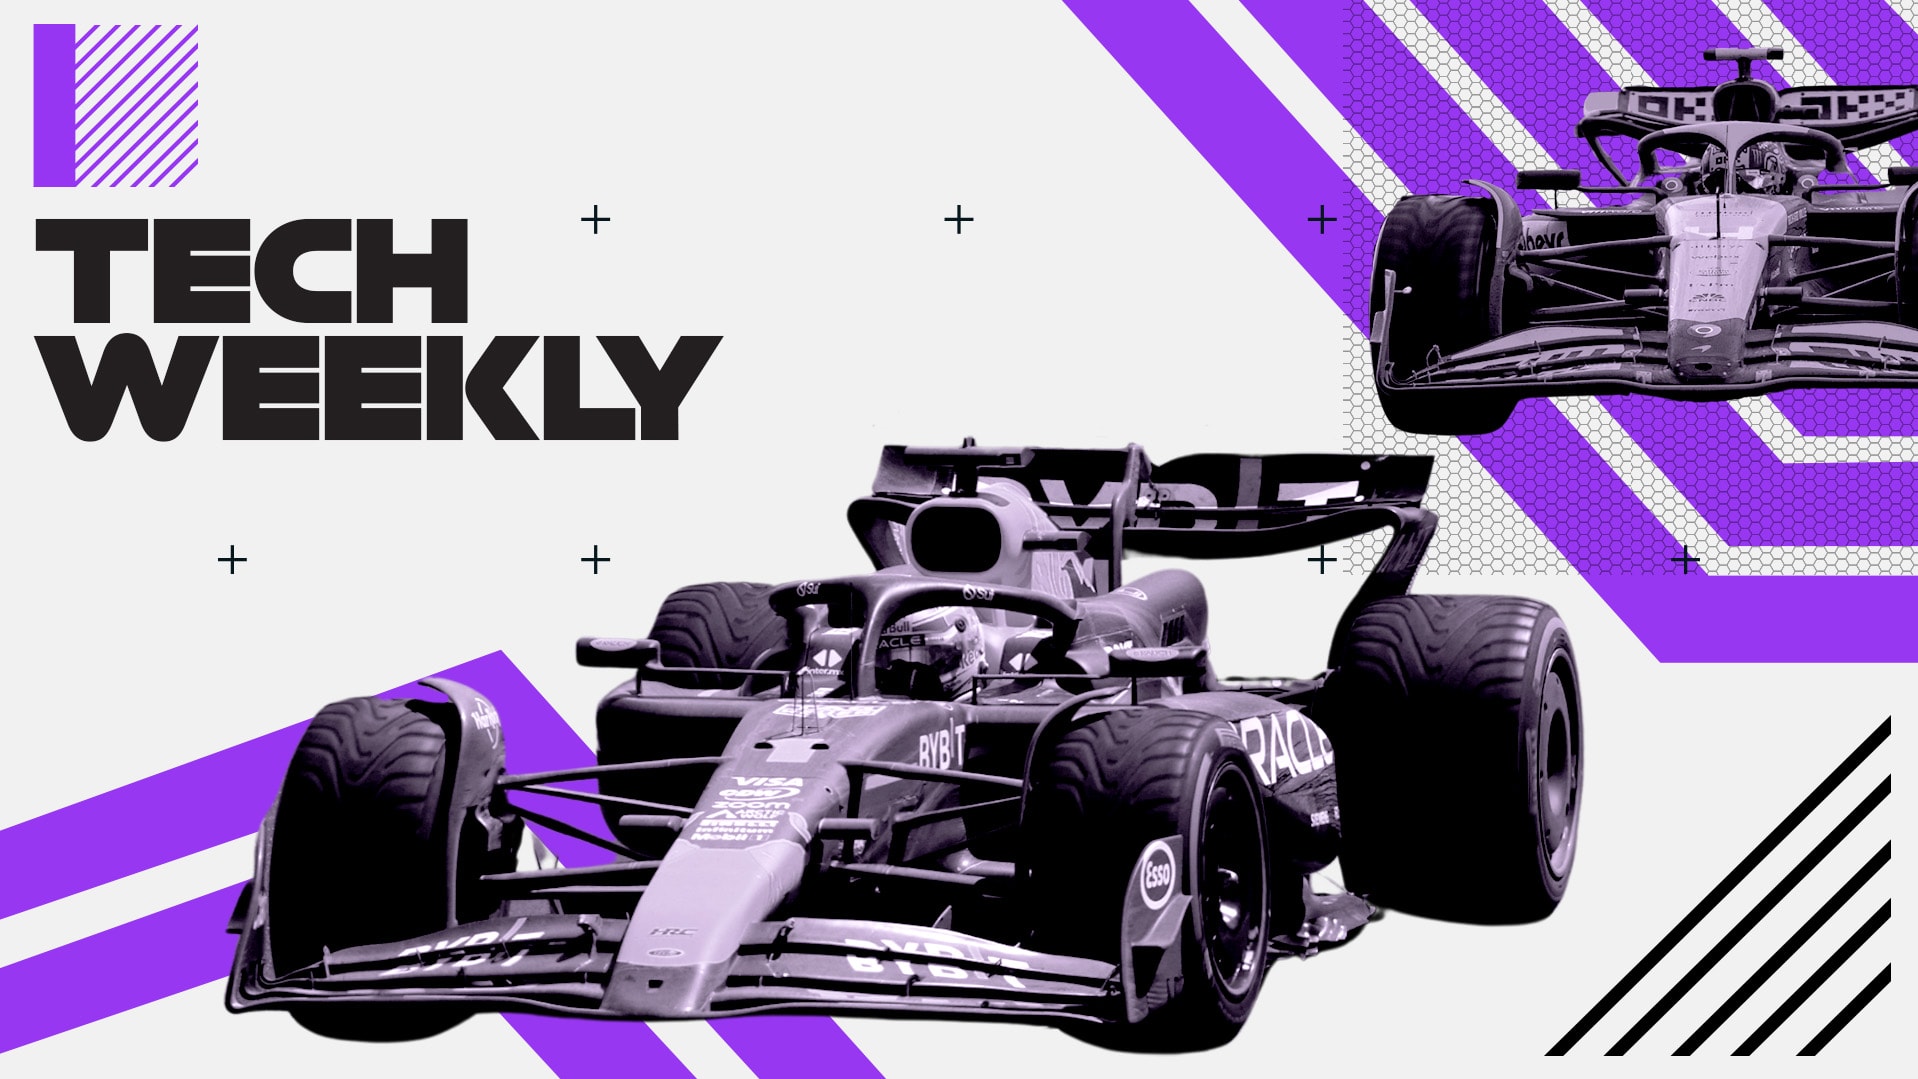 TECH WEEKLY: Red Bull’s F1 stranglehold is loosening – and Barcelona will be a key battleground for their challengers